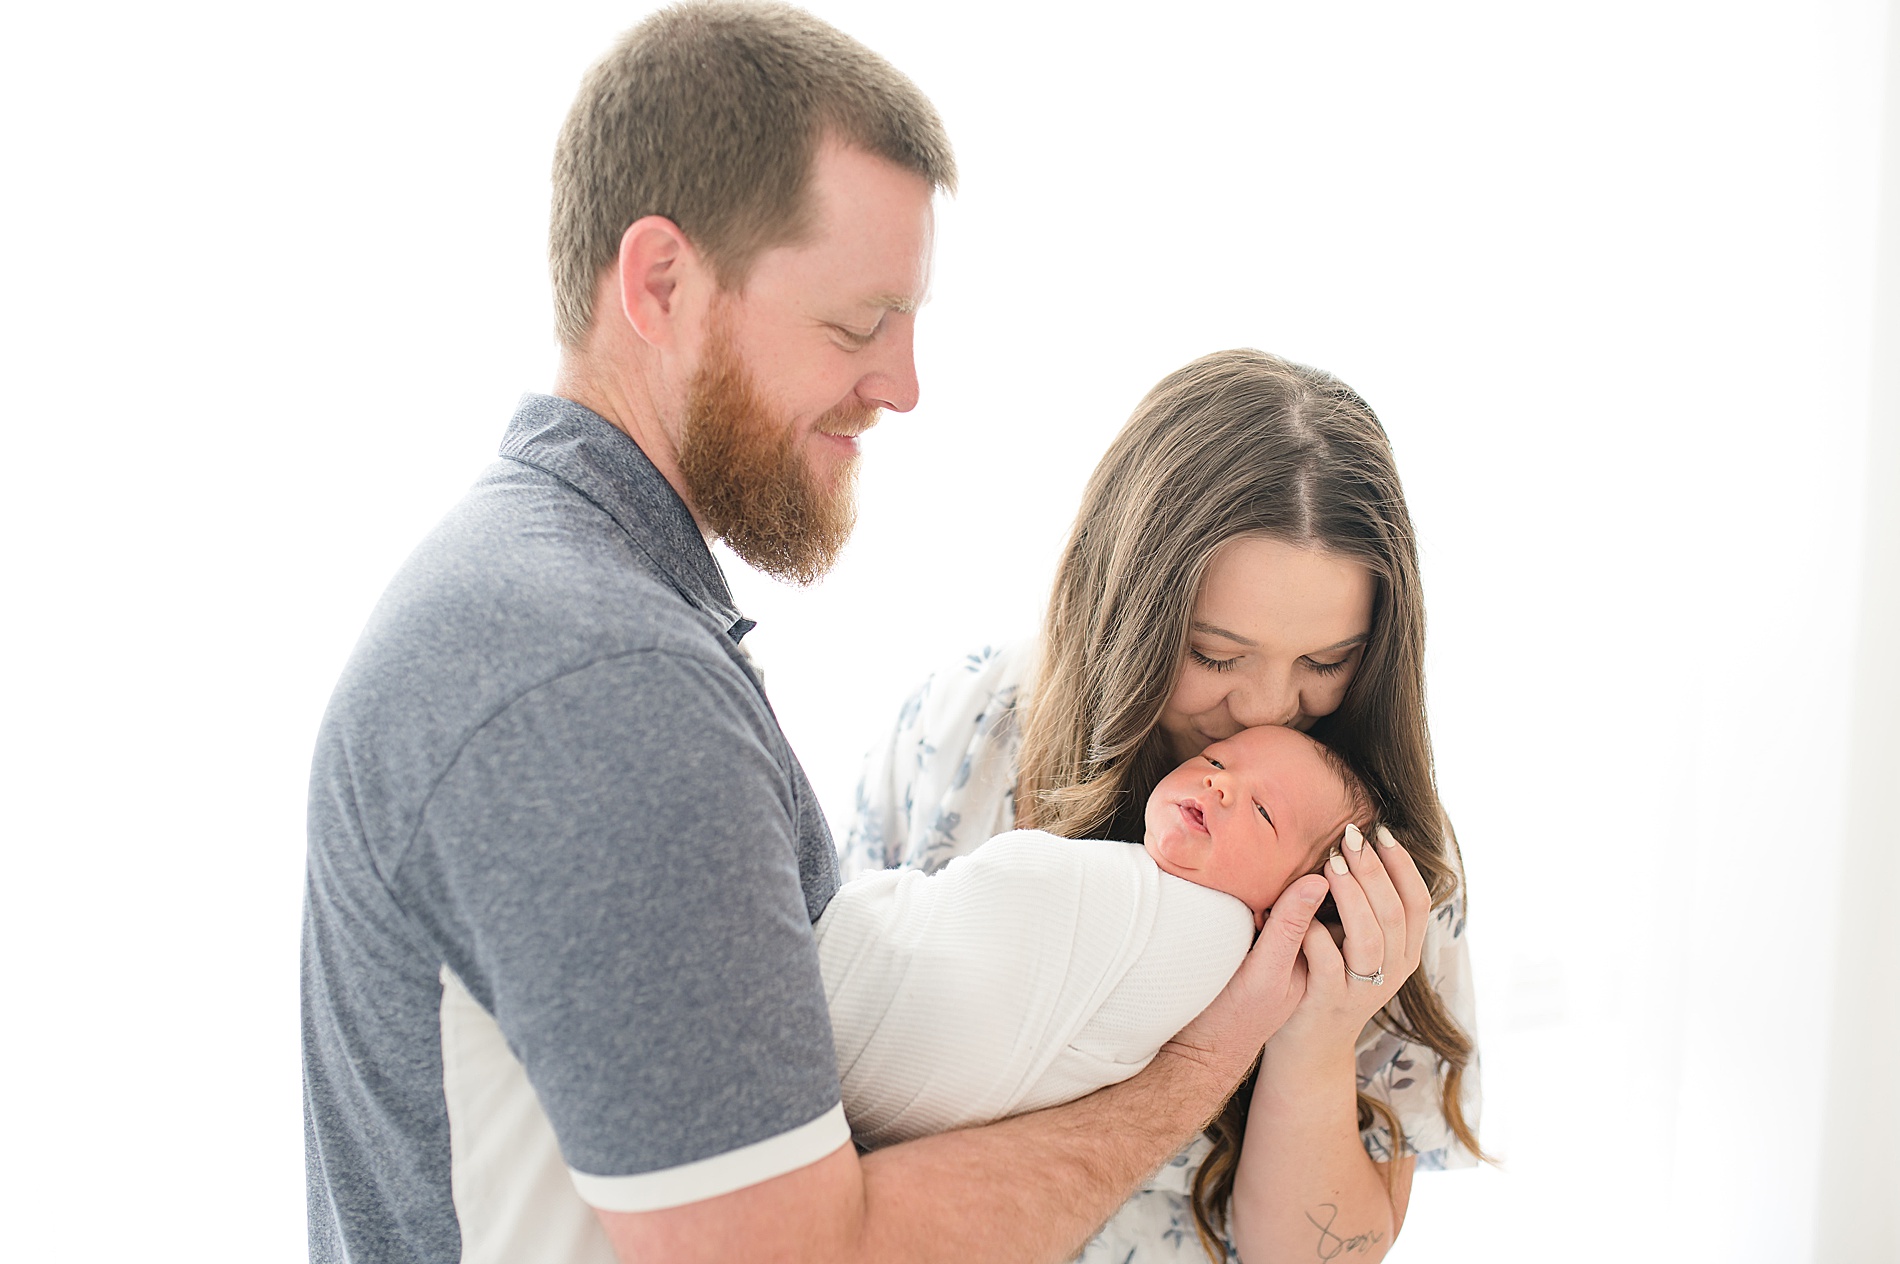 parents hold and kiss their newborn during studio session